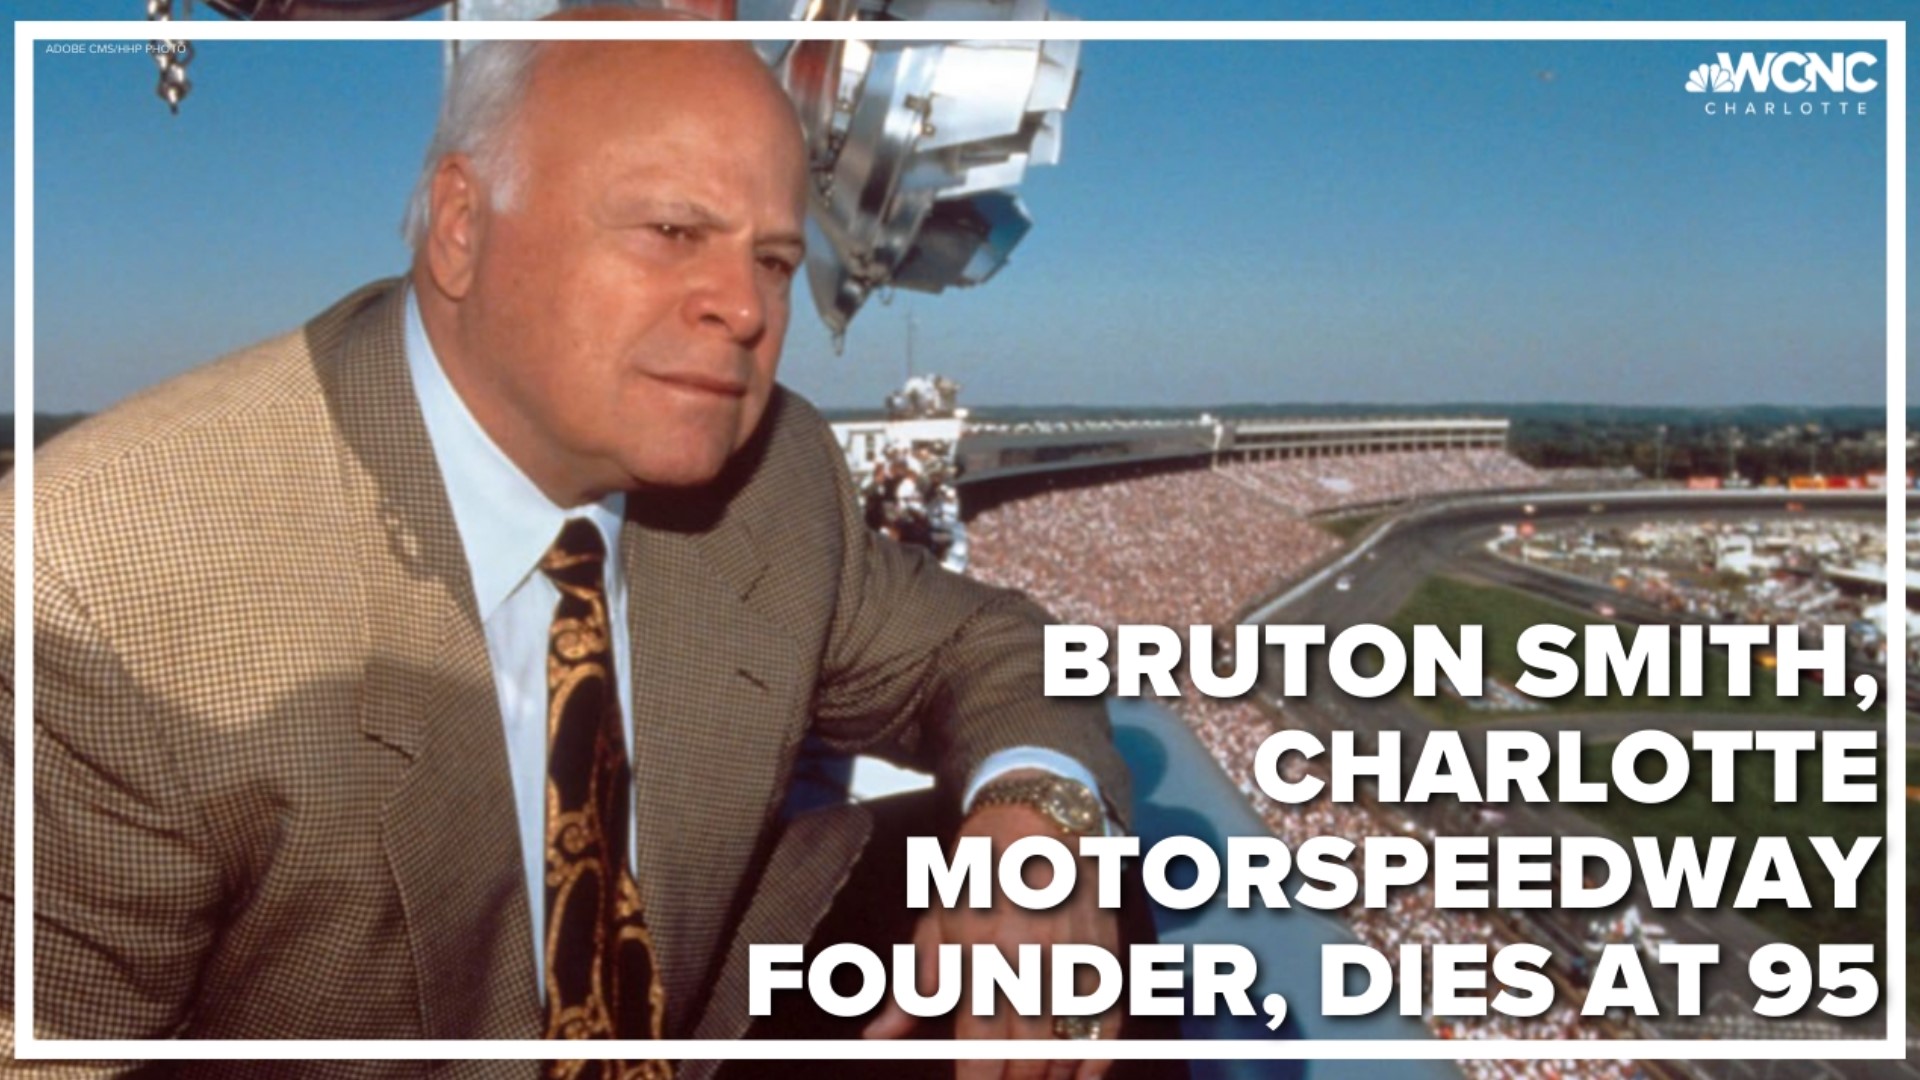 Bruton Smith, the founder of the company that owns nearly a dozen NASCAR tracks, died on Wednesday of natural causes. Smith was 95.